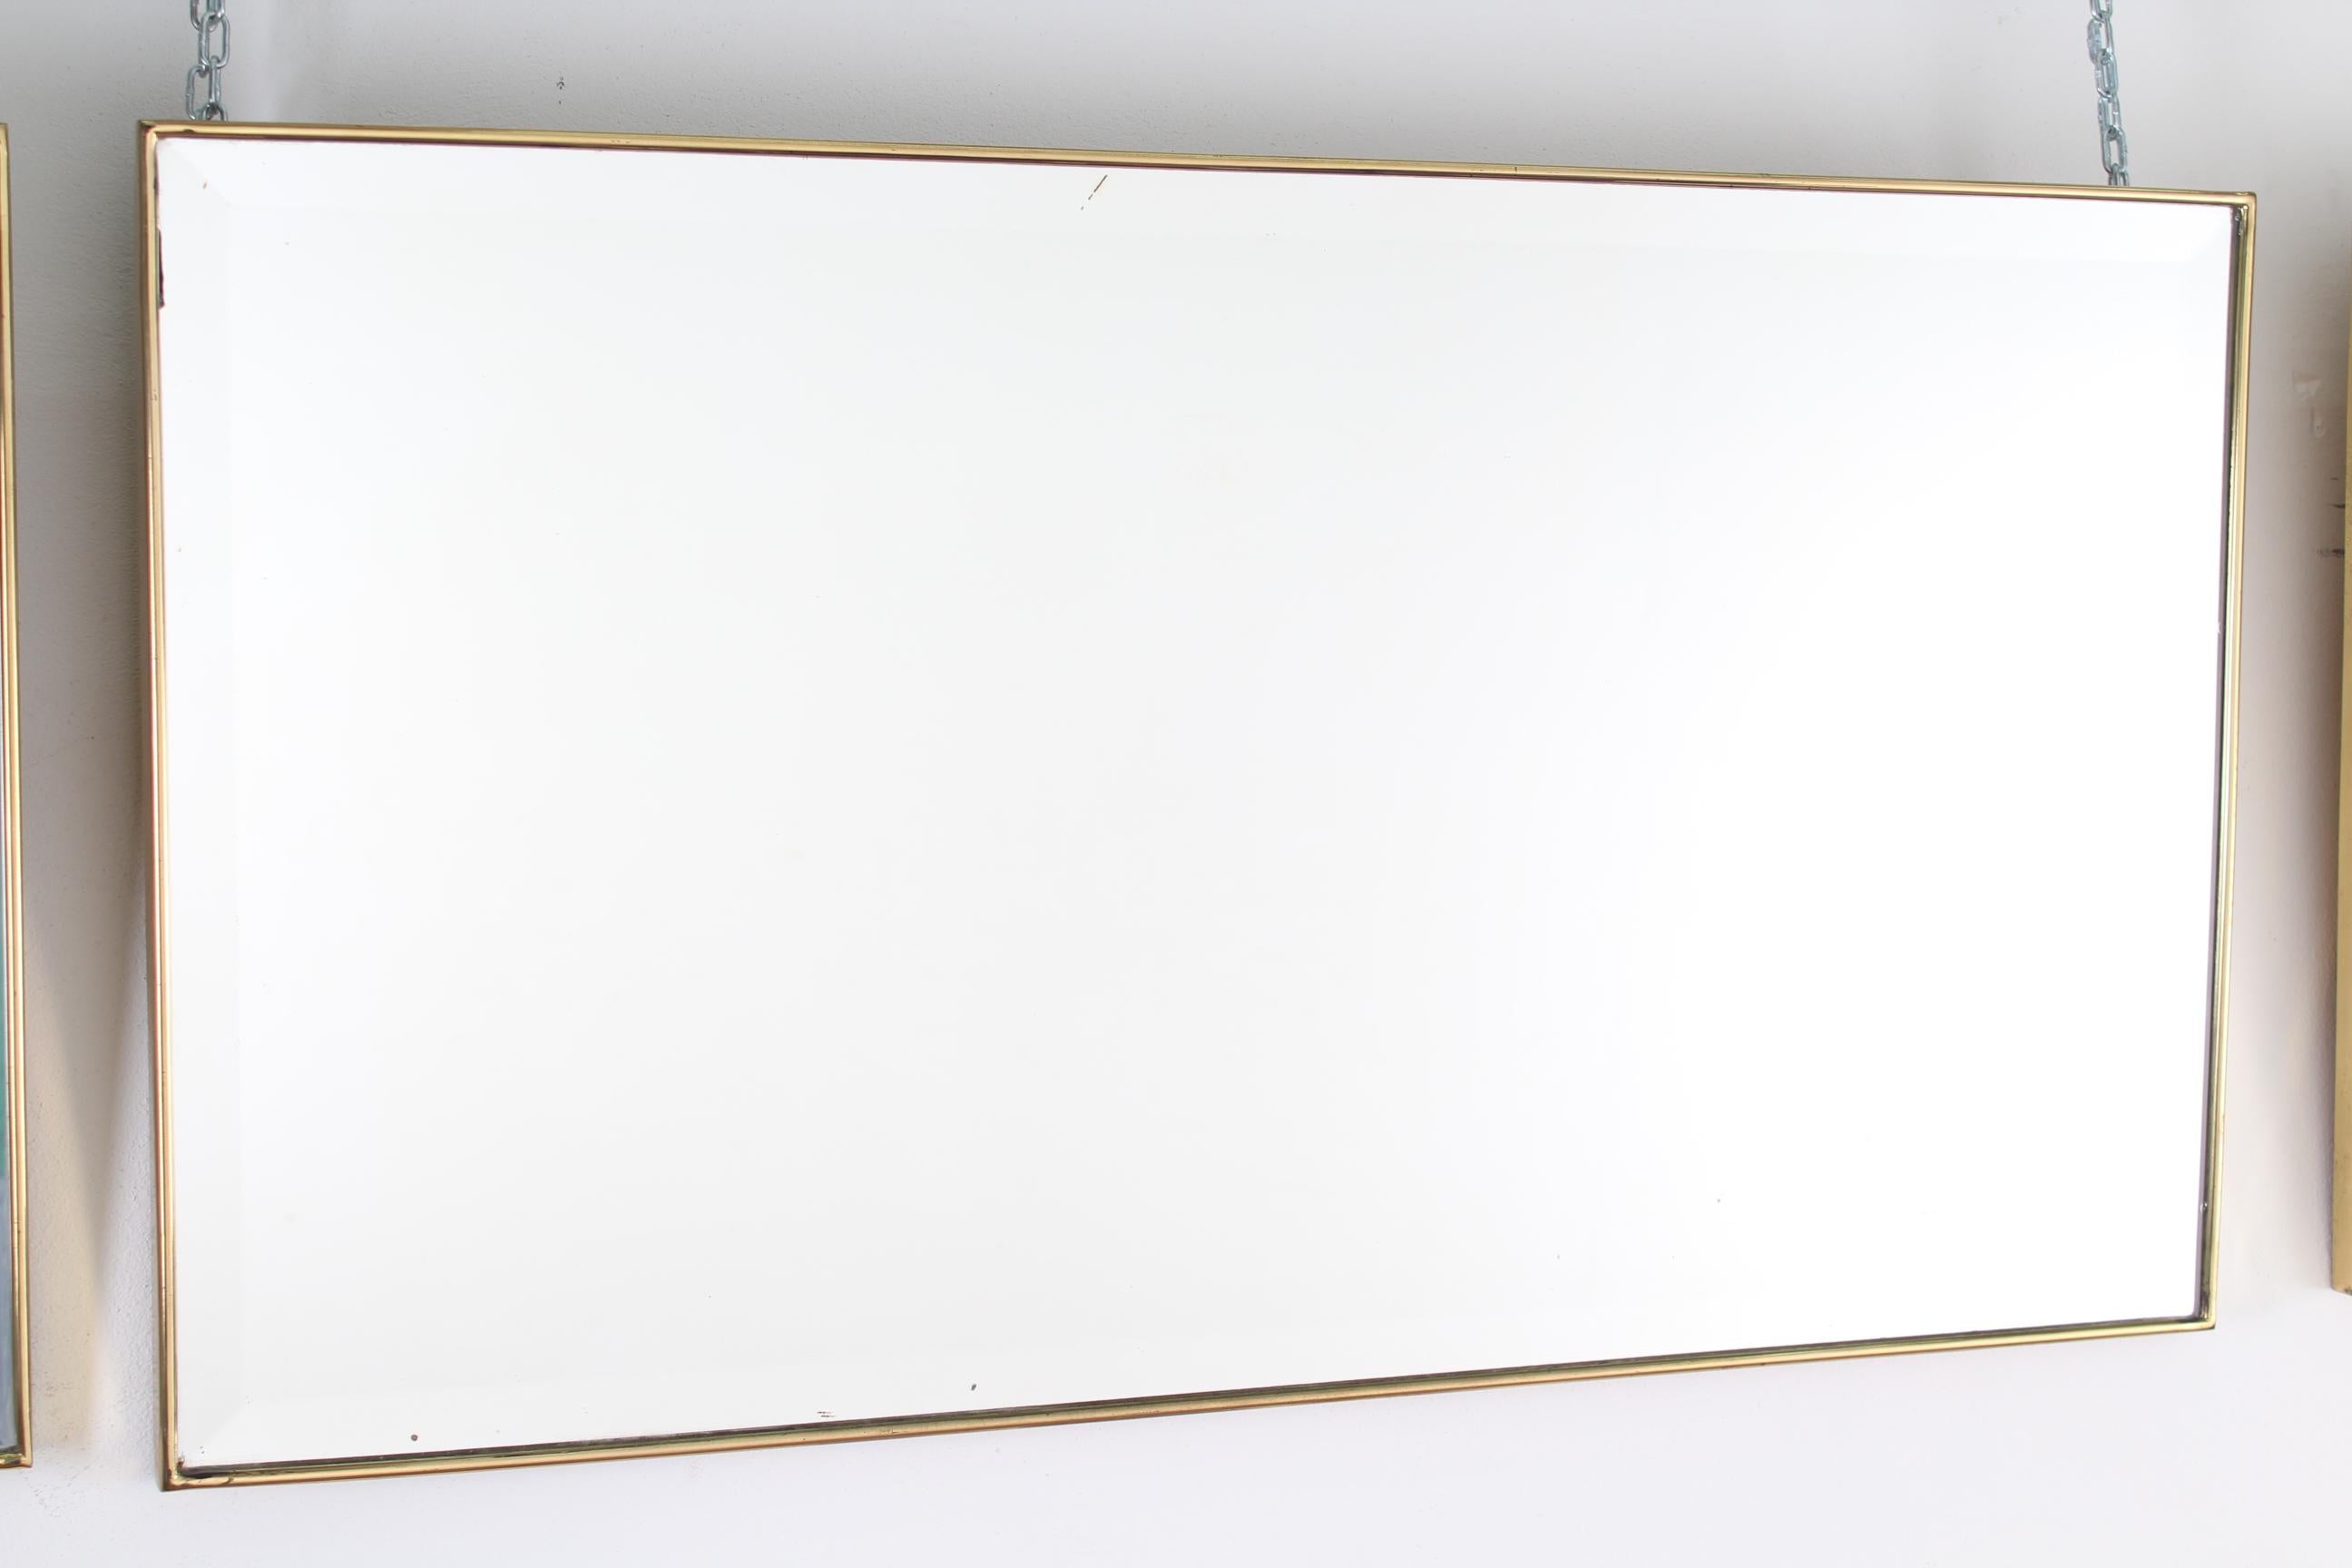 This is a large mid-century Italian wall mirror with a brass frame from the 1950s. The mirror has a rectangular shape, bevelled at the edges, classically elegant and distinct in a modern Gio Ponti style.
Wear consistent with age and use.